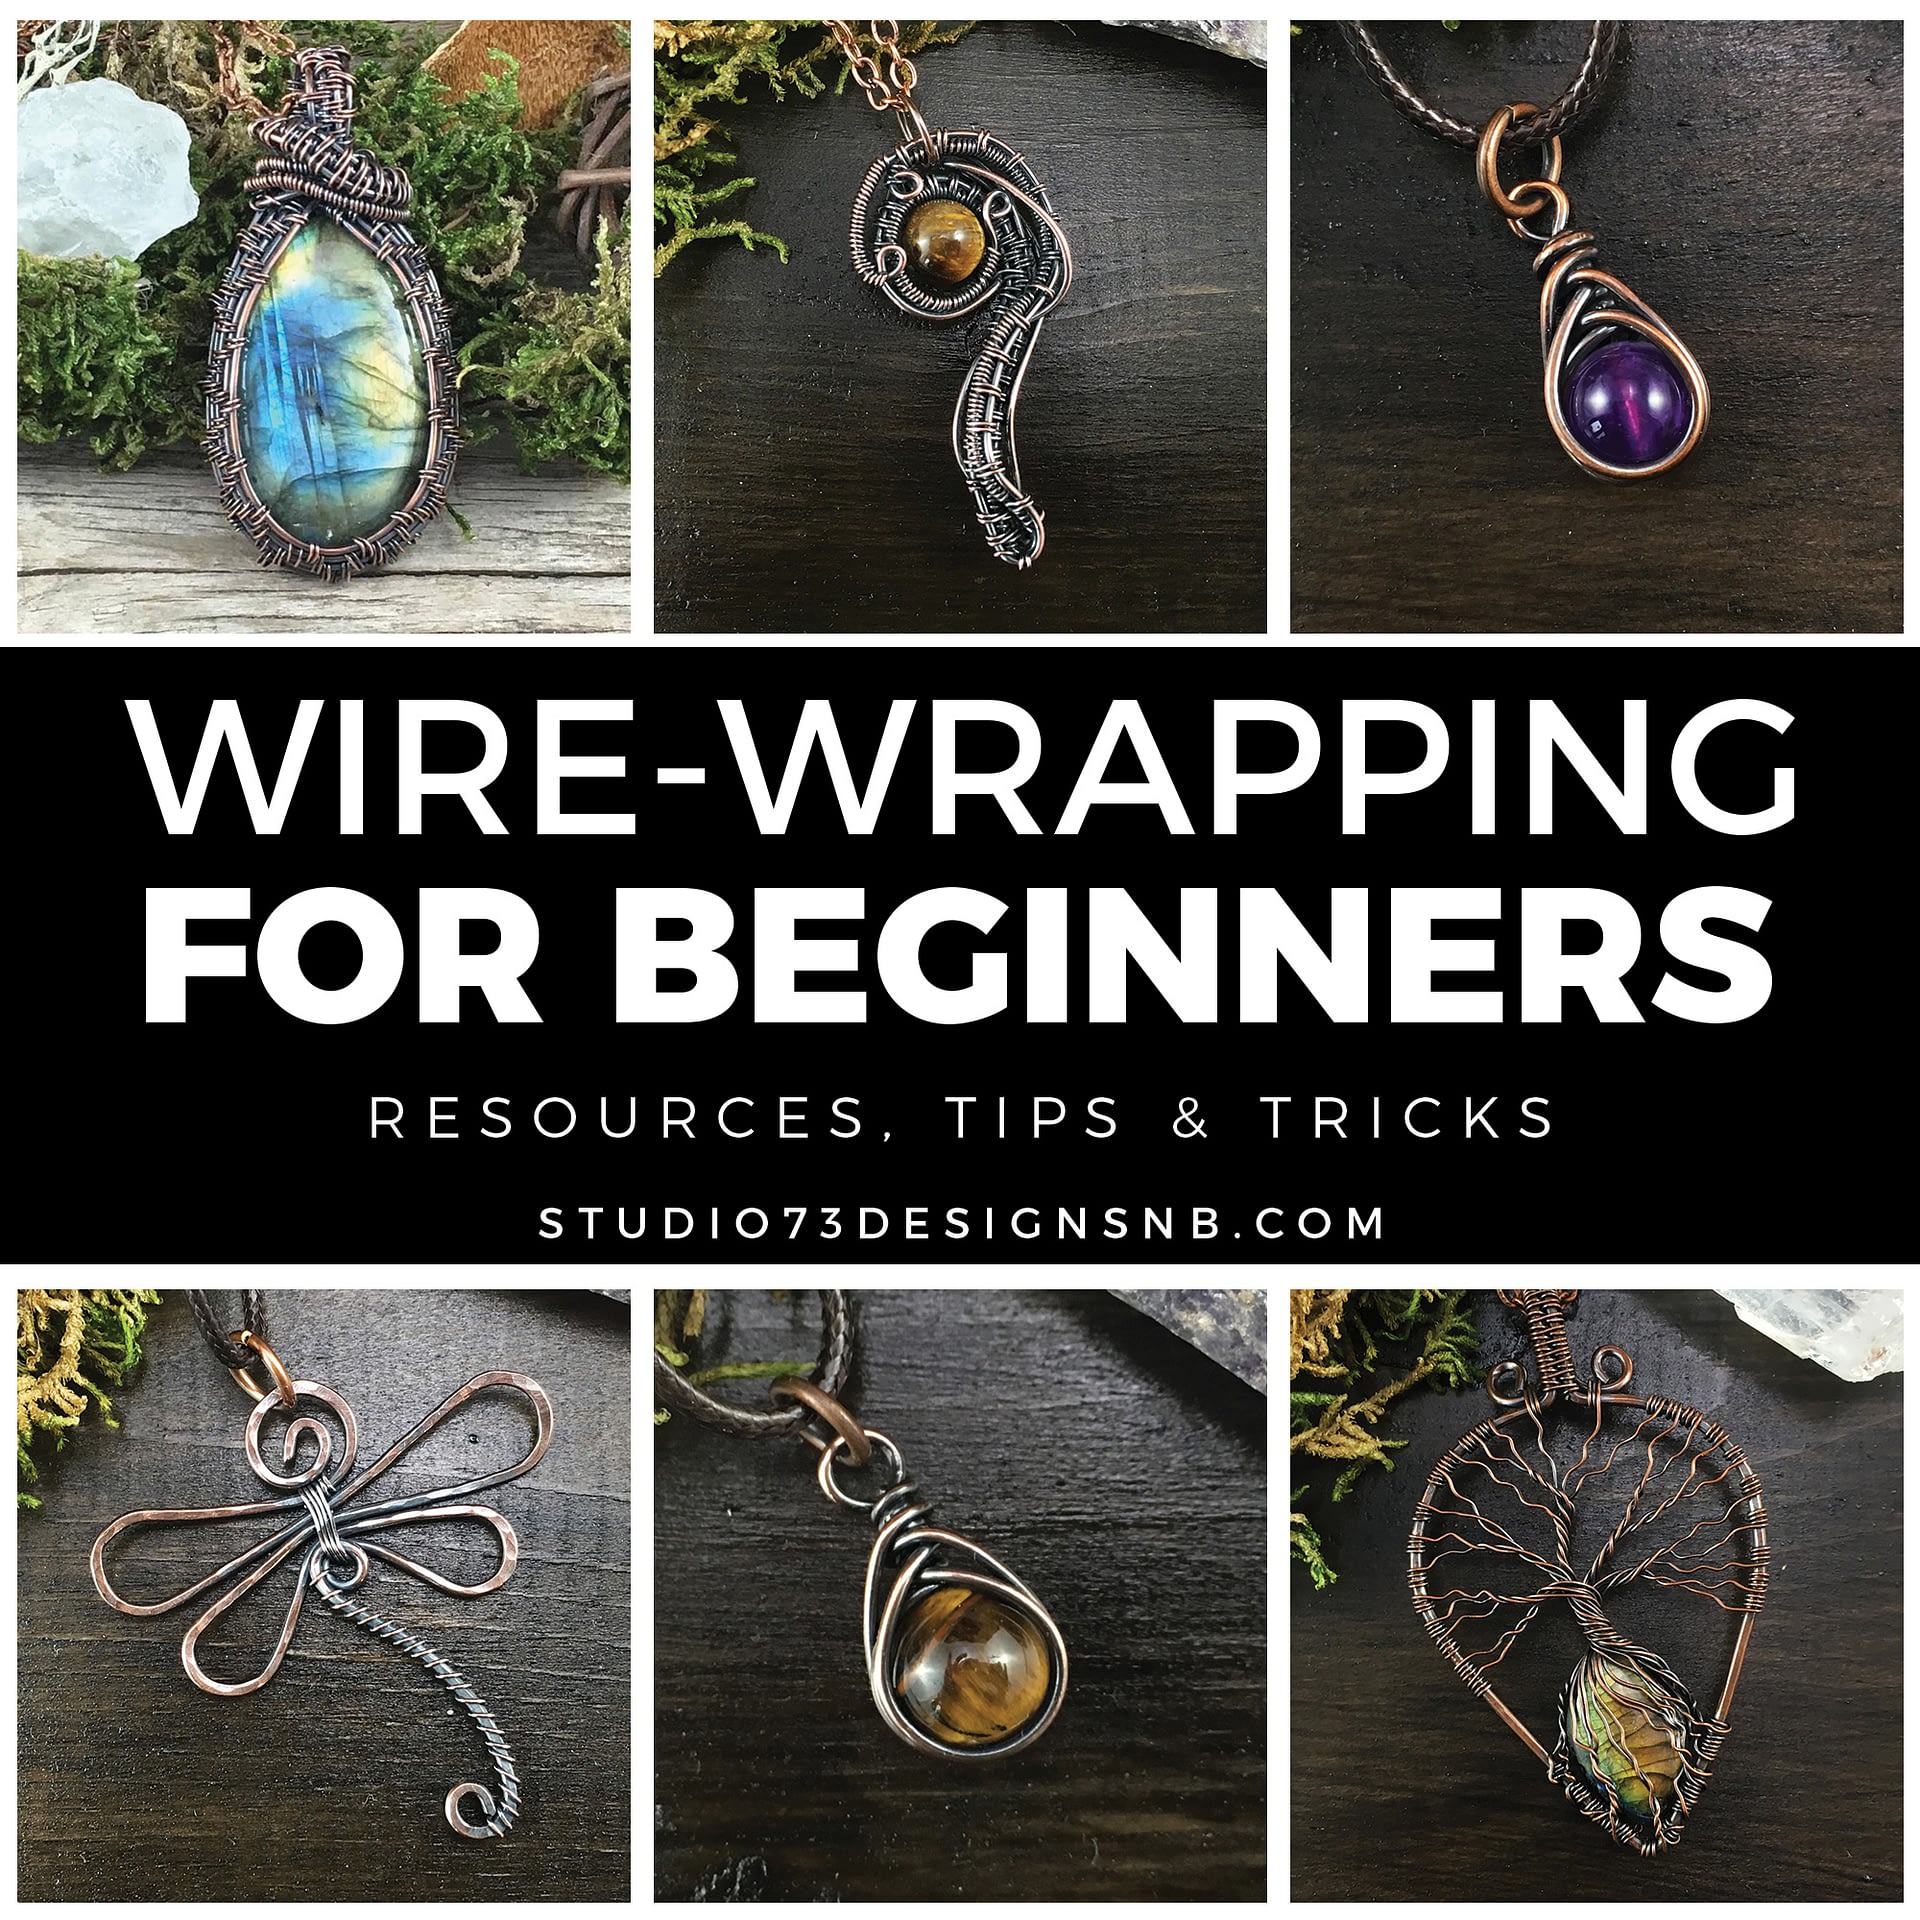 WireWrapping for Beginners Studio 73 Designs